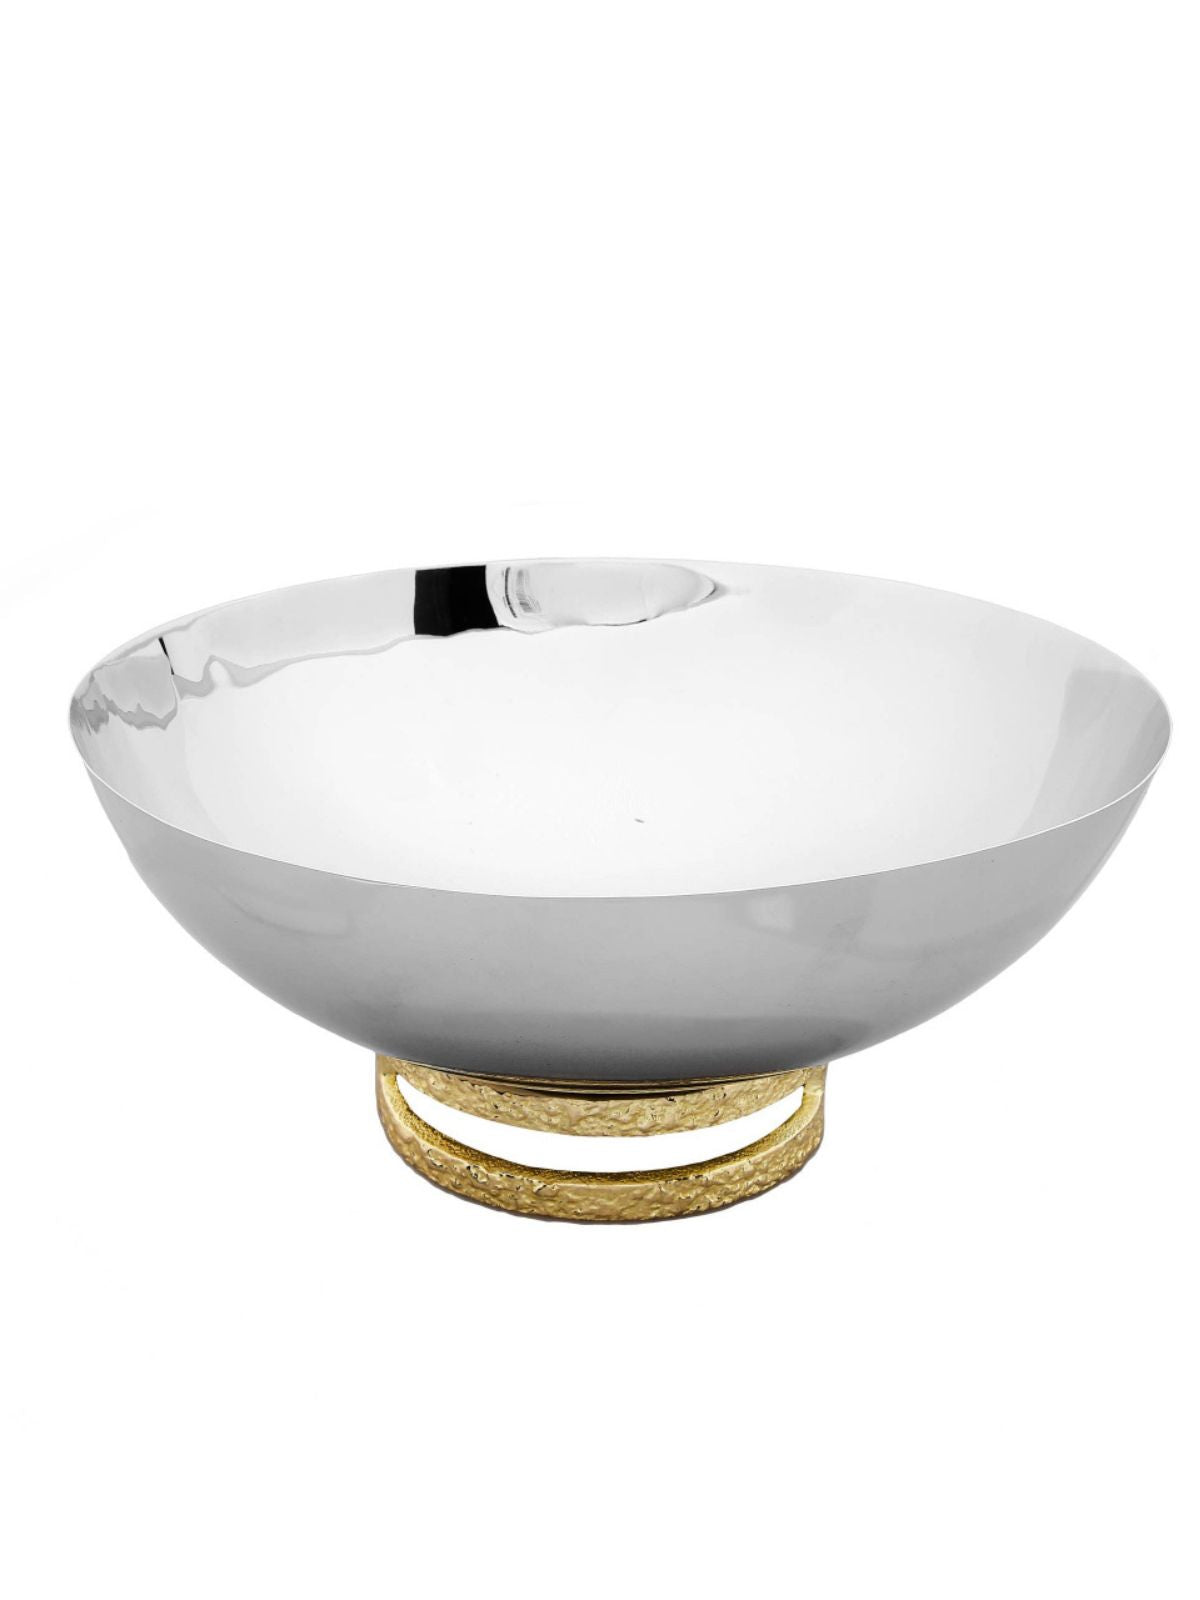 Stainless Steel Bowl with Gold Loop Base, available in 2 sizes. Sold by KYA Home Decor.